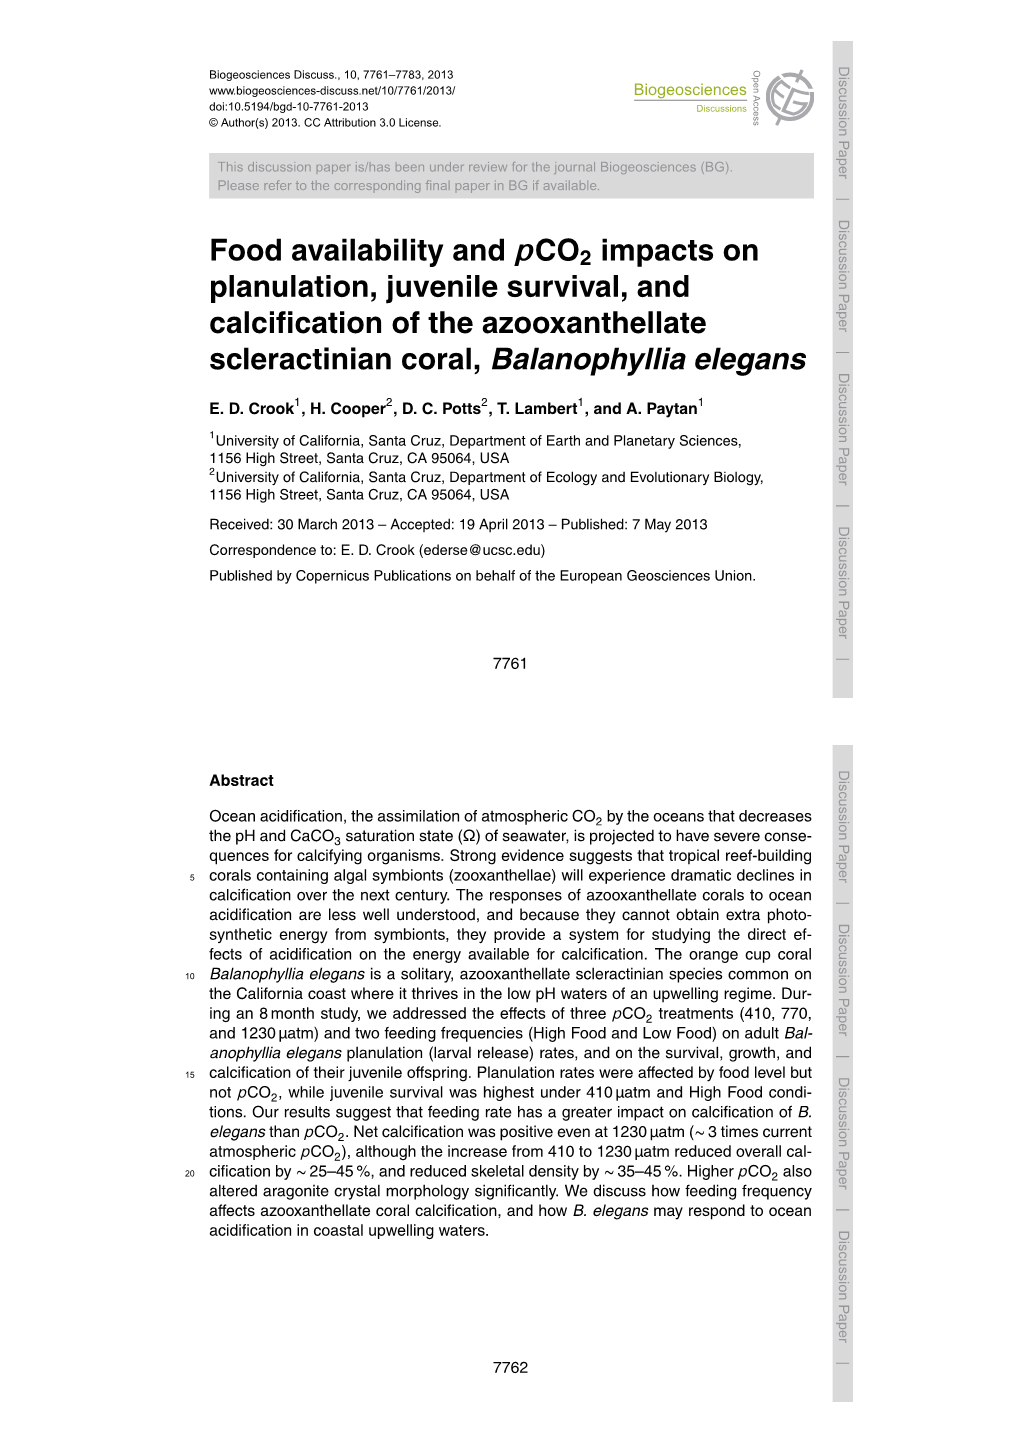 Food Availability and Pco2 Impacts on Planulation, Juvenile Survival